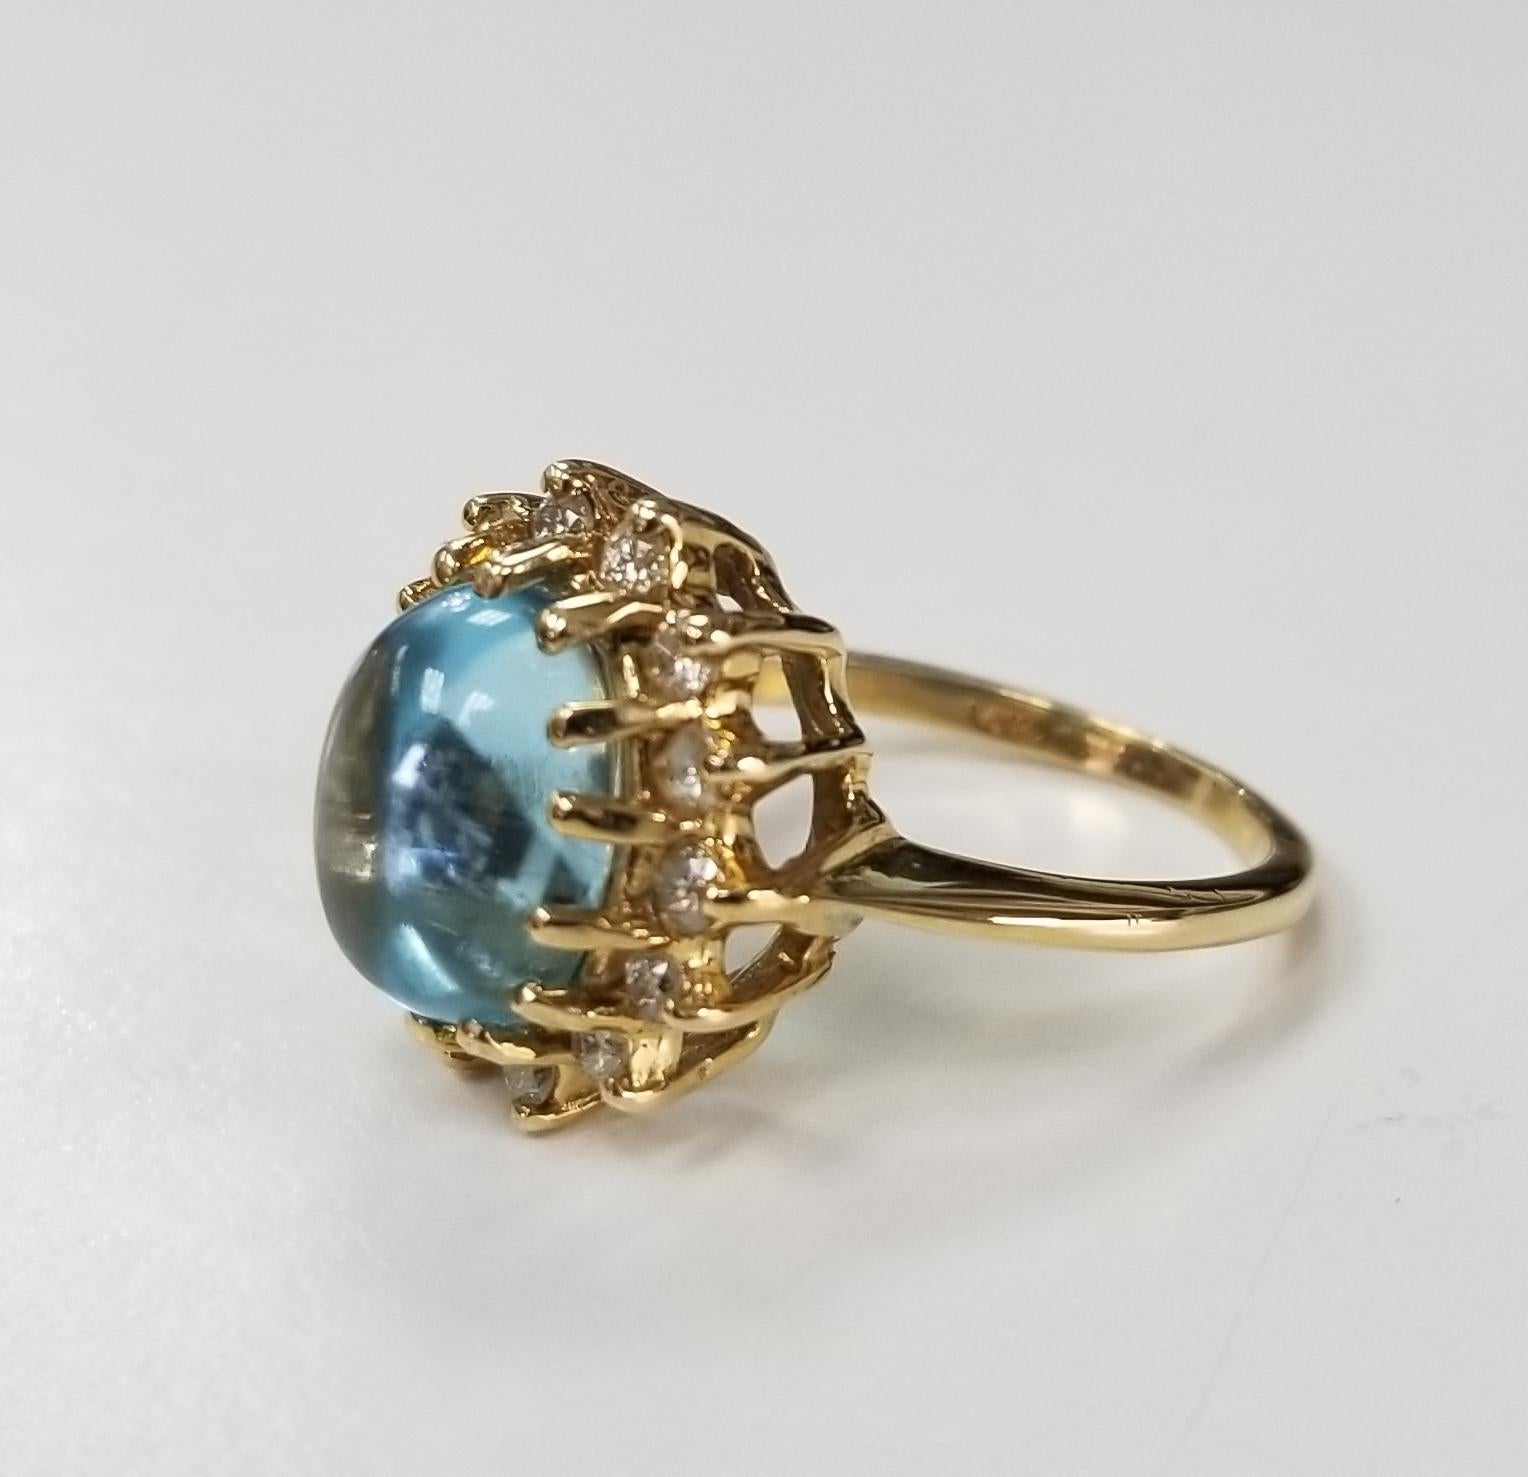 14k yellow gold Blue Topaz Cabochon and Diamond ring, containing 1 oval cabochon cut blue topaz weighing 3.75cts. and 14 round full cut diamonds weighing .40pts.  This ring is a size 5 but we will size to fit for free.